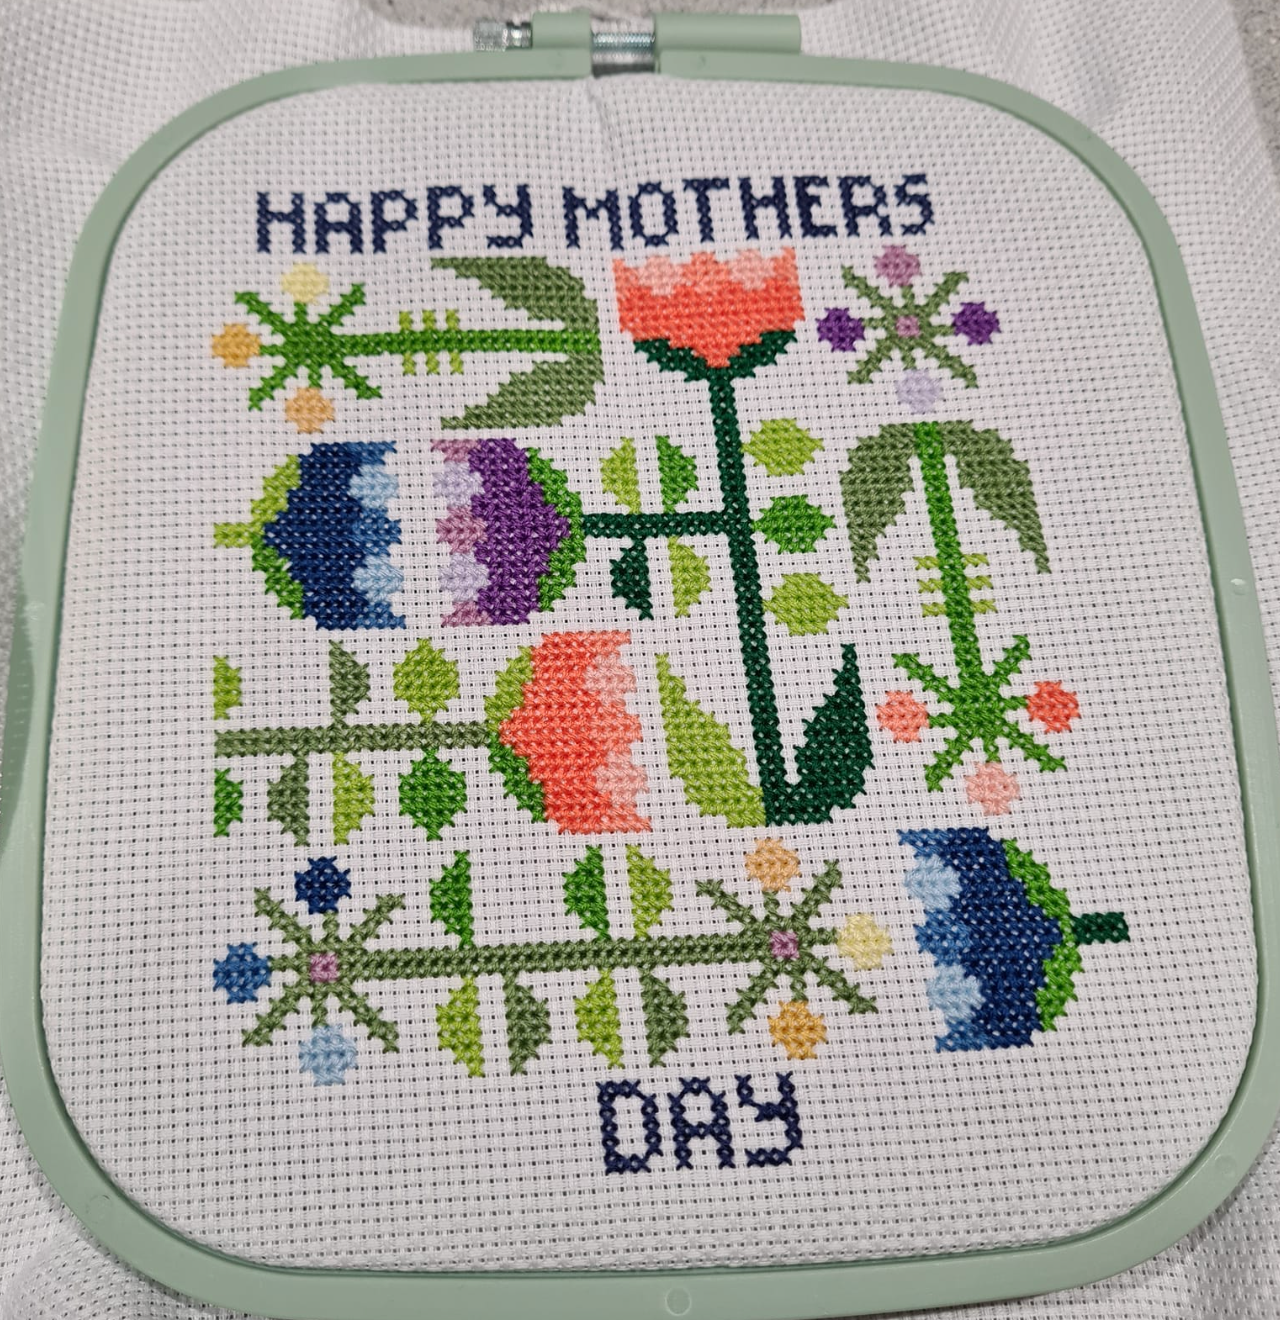 Leah's Mothers Day project